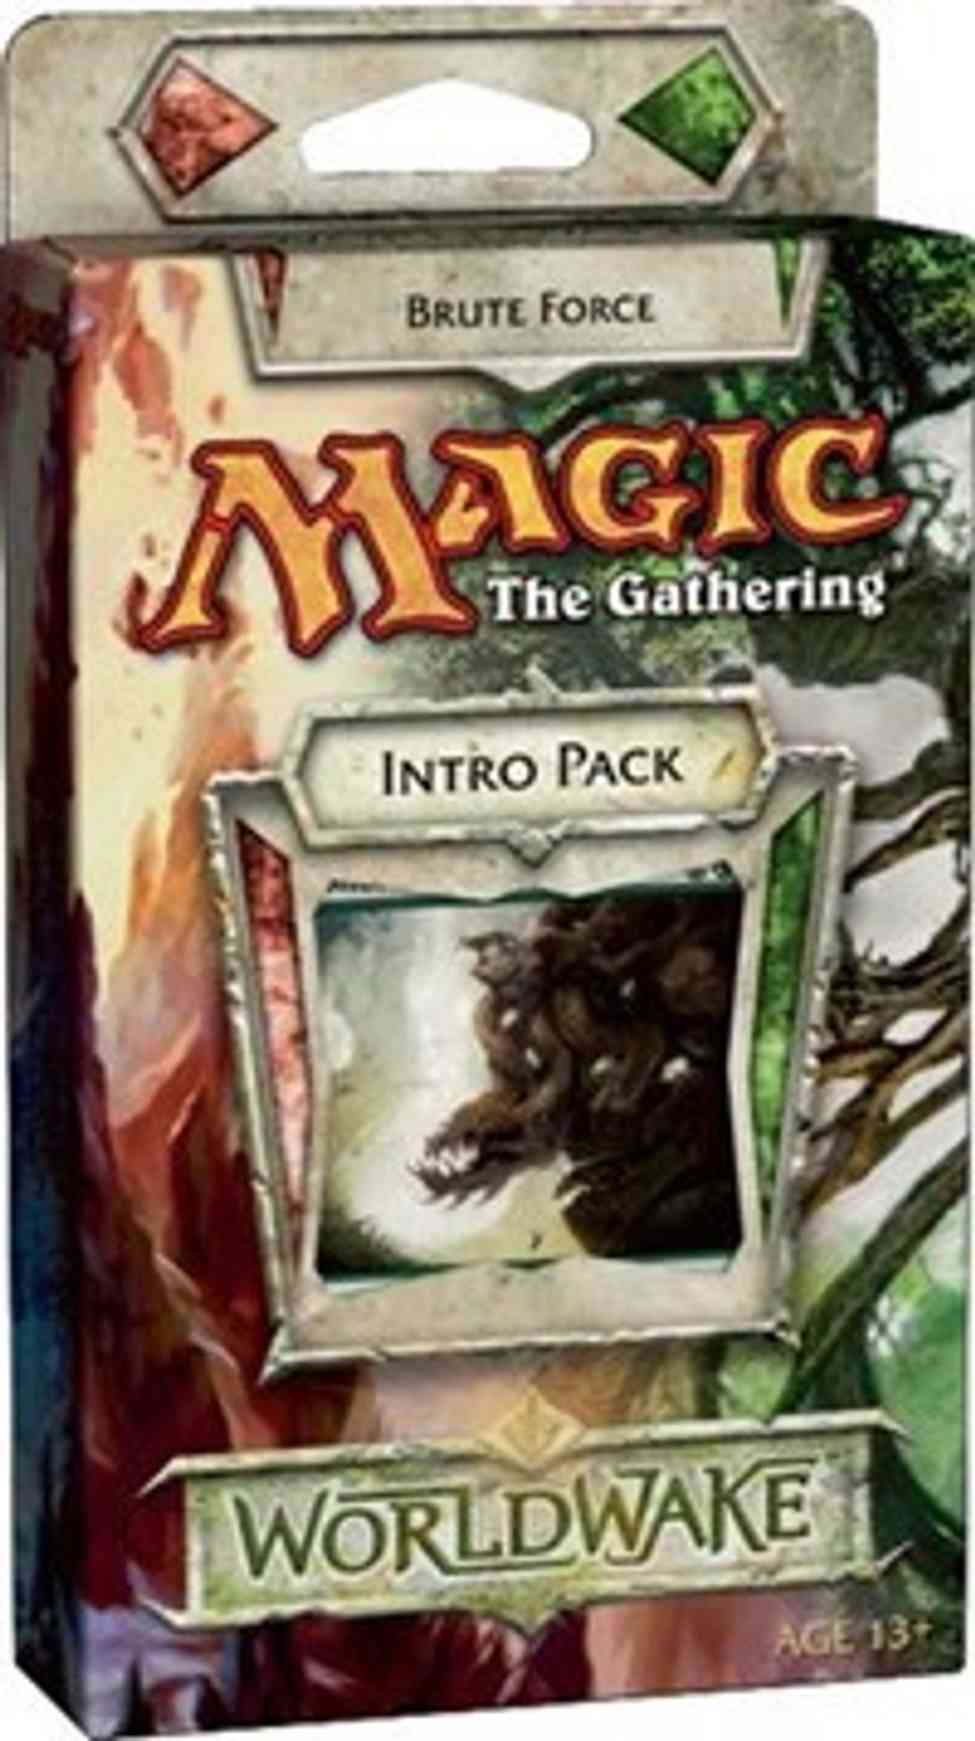 Worldwake Intro Pack - Brute Force magic card front